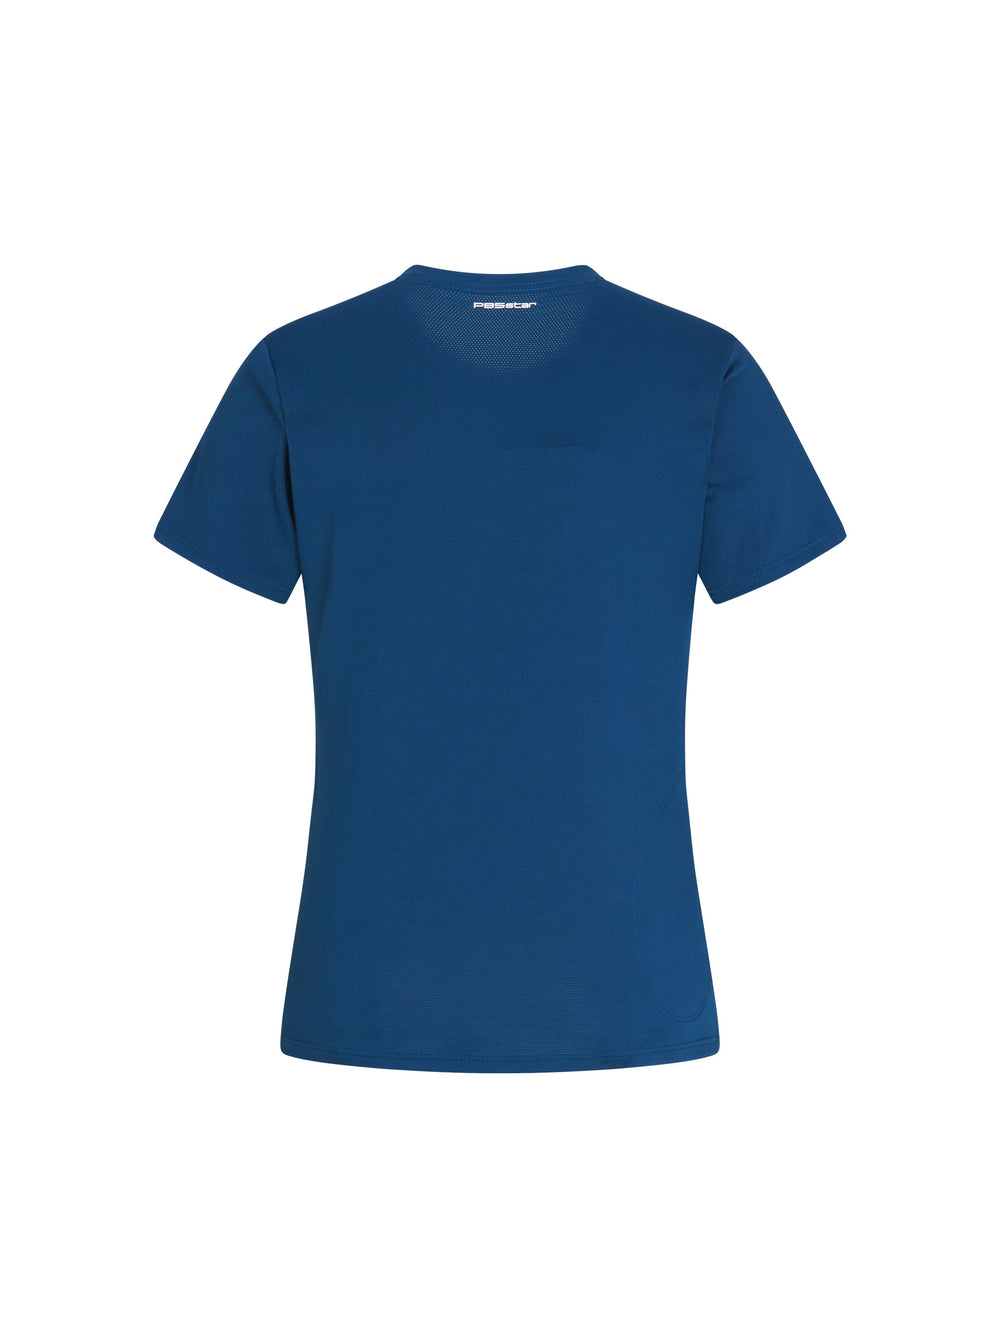 Women's Vented Court Tee back view in astral blue and pink. Small logo centered below neck seam.